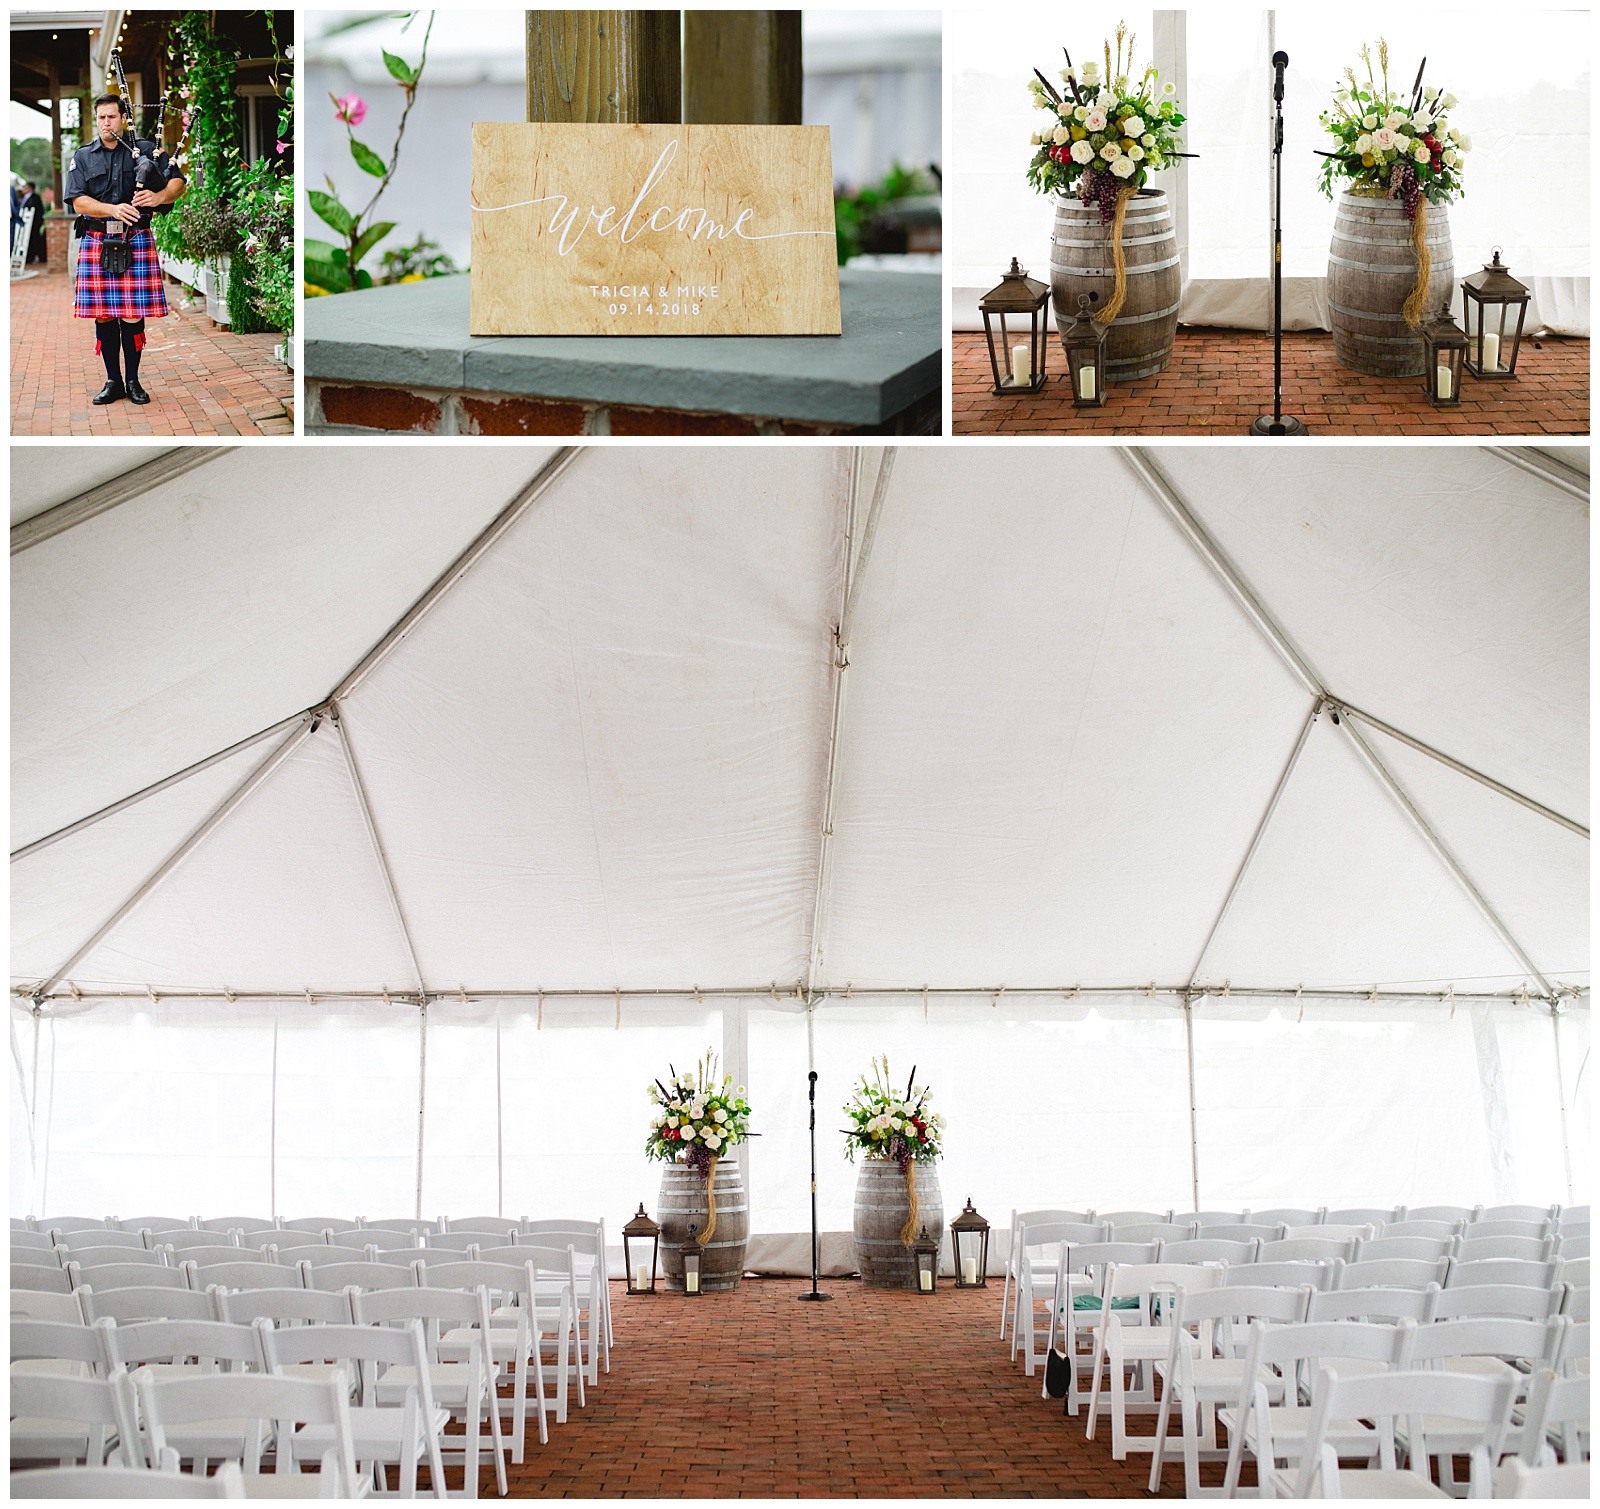 willow creek winery wedding cape may wedding cape may new jersey winery wedding outdoor ceremony tent ceremony